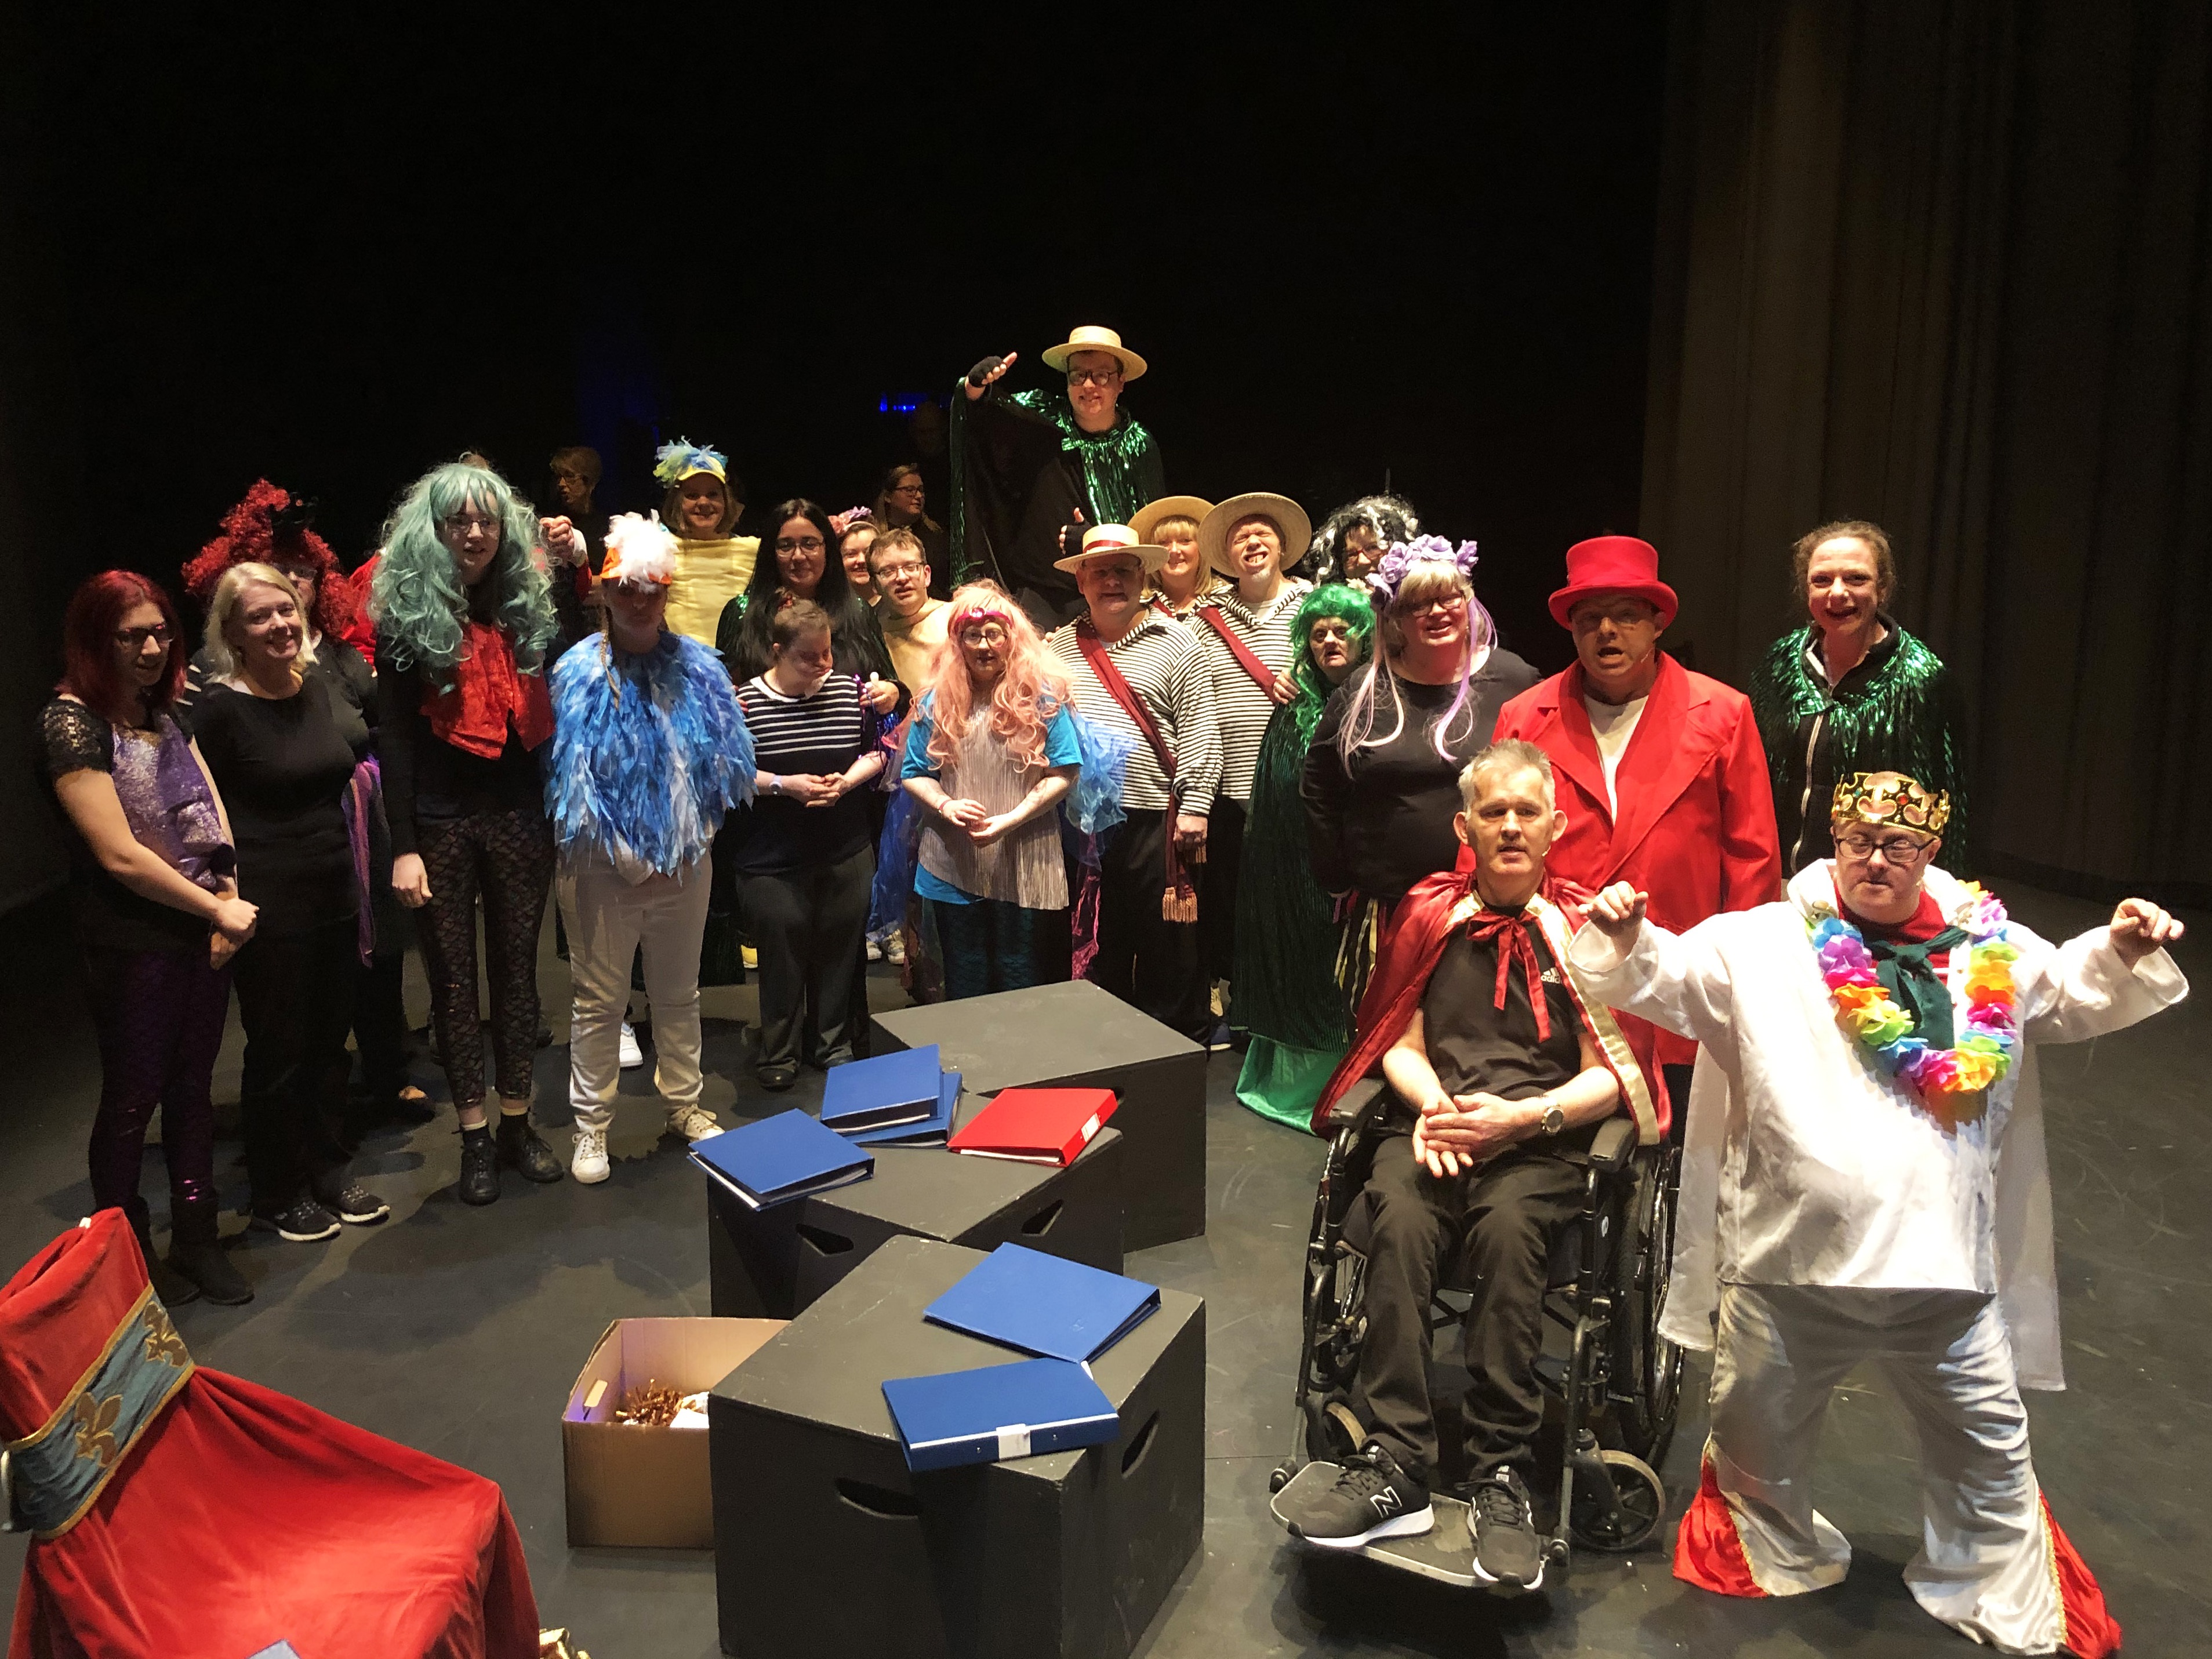 Hillcrest Futures drama group dazzles in fifth annual show